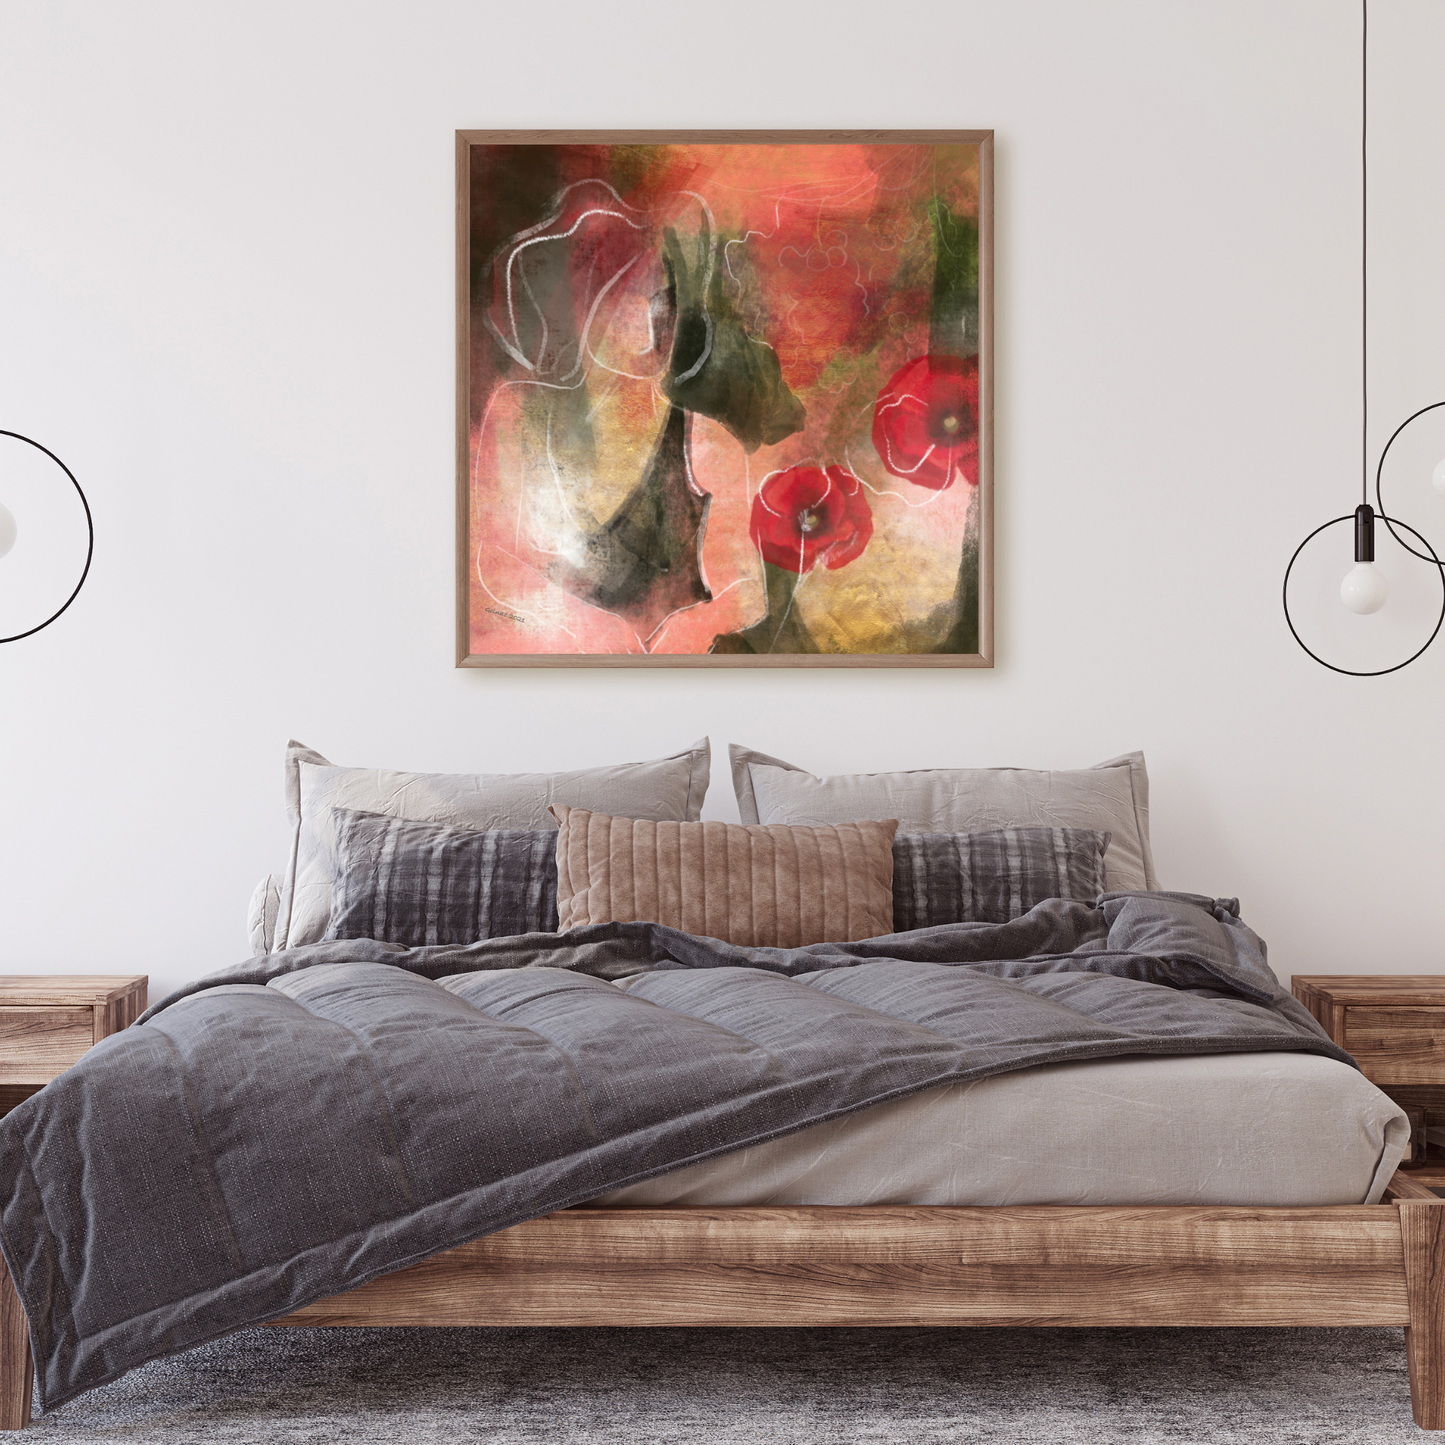 An example of the Dangerous Beauty painting by ArisaTeam in a bedroom